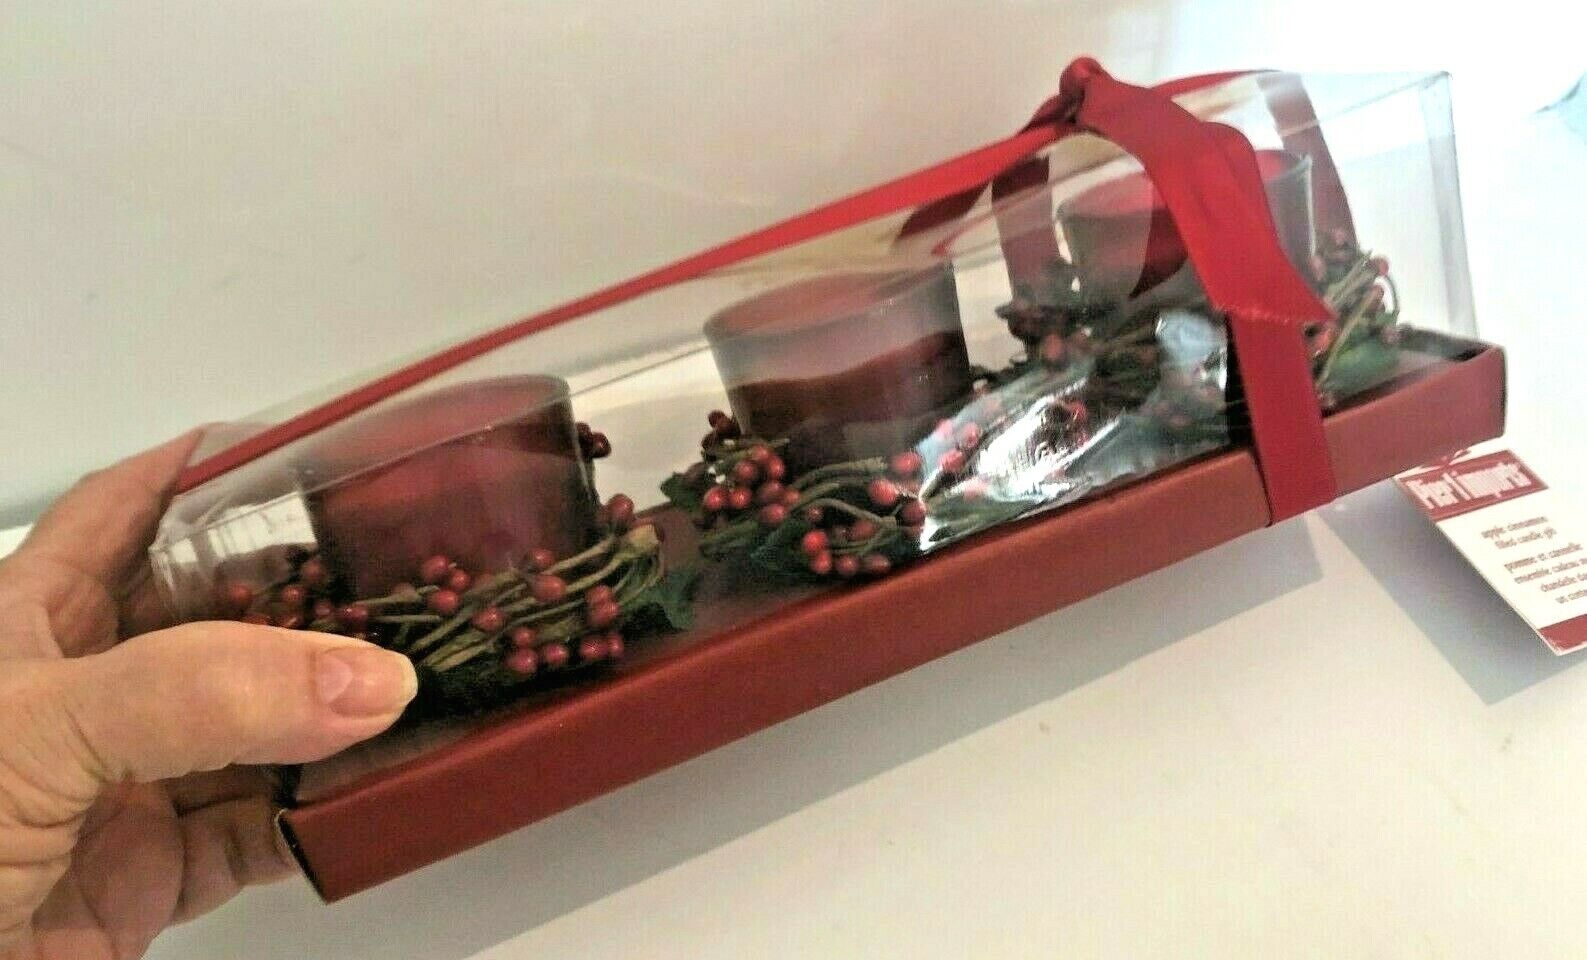 NEW Pier 1 RED 3 VOTIVE CANDLE BOXED Gift SET Apple Cinnamon BERRY WREATHS  a